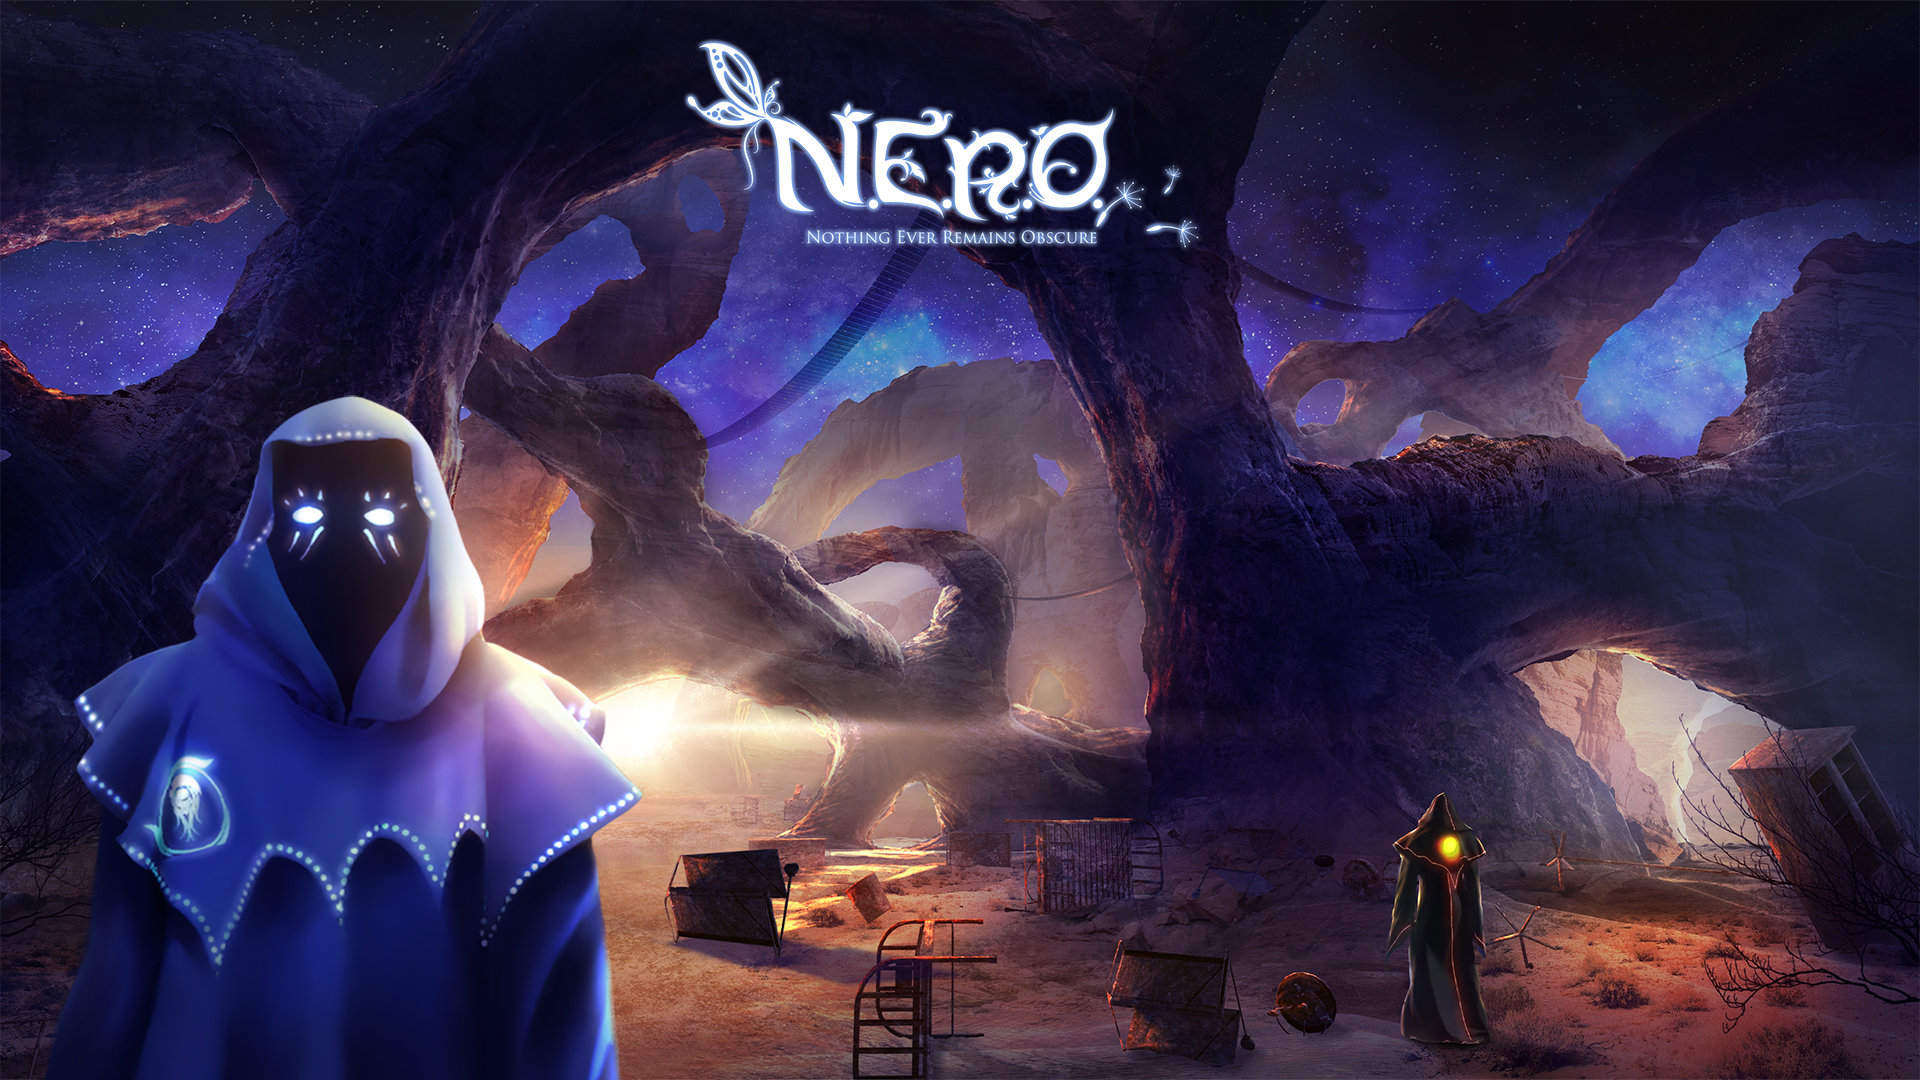 N.E.R.O.: Nothing Ever Remains Obscure in arrivo su PS4